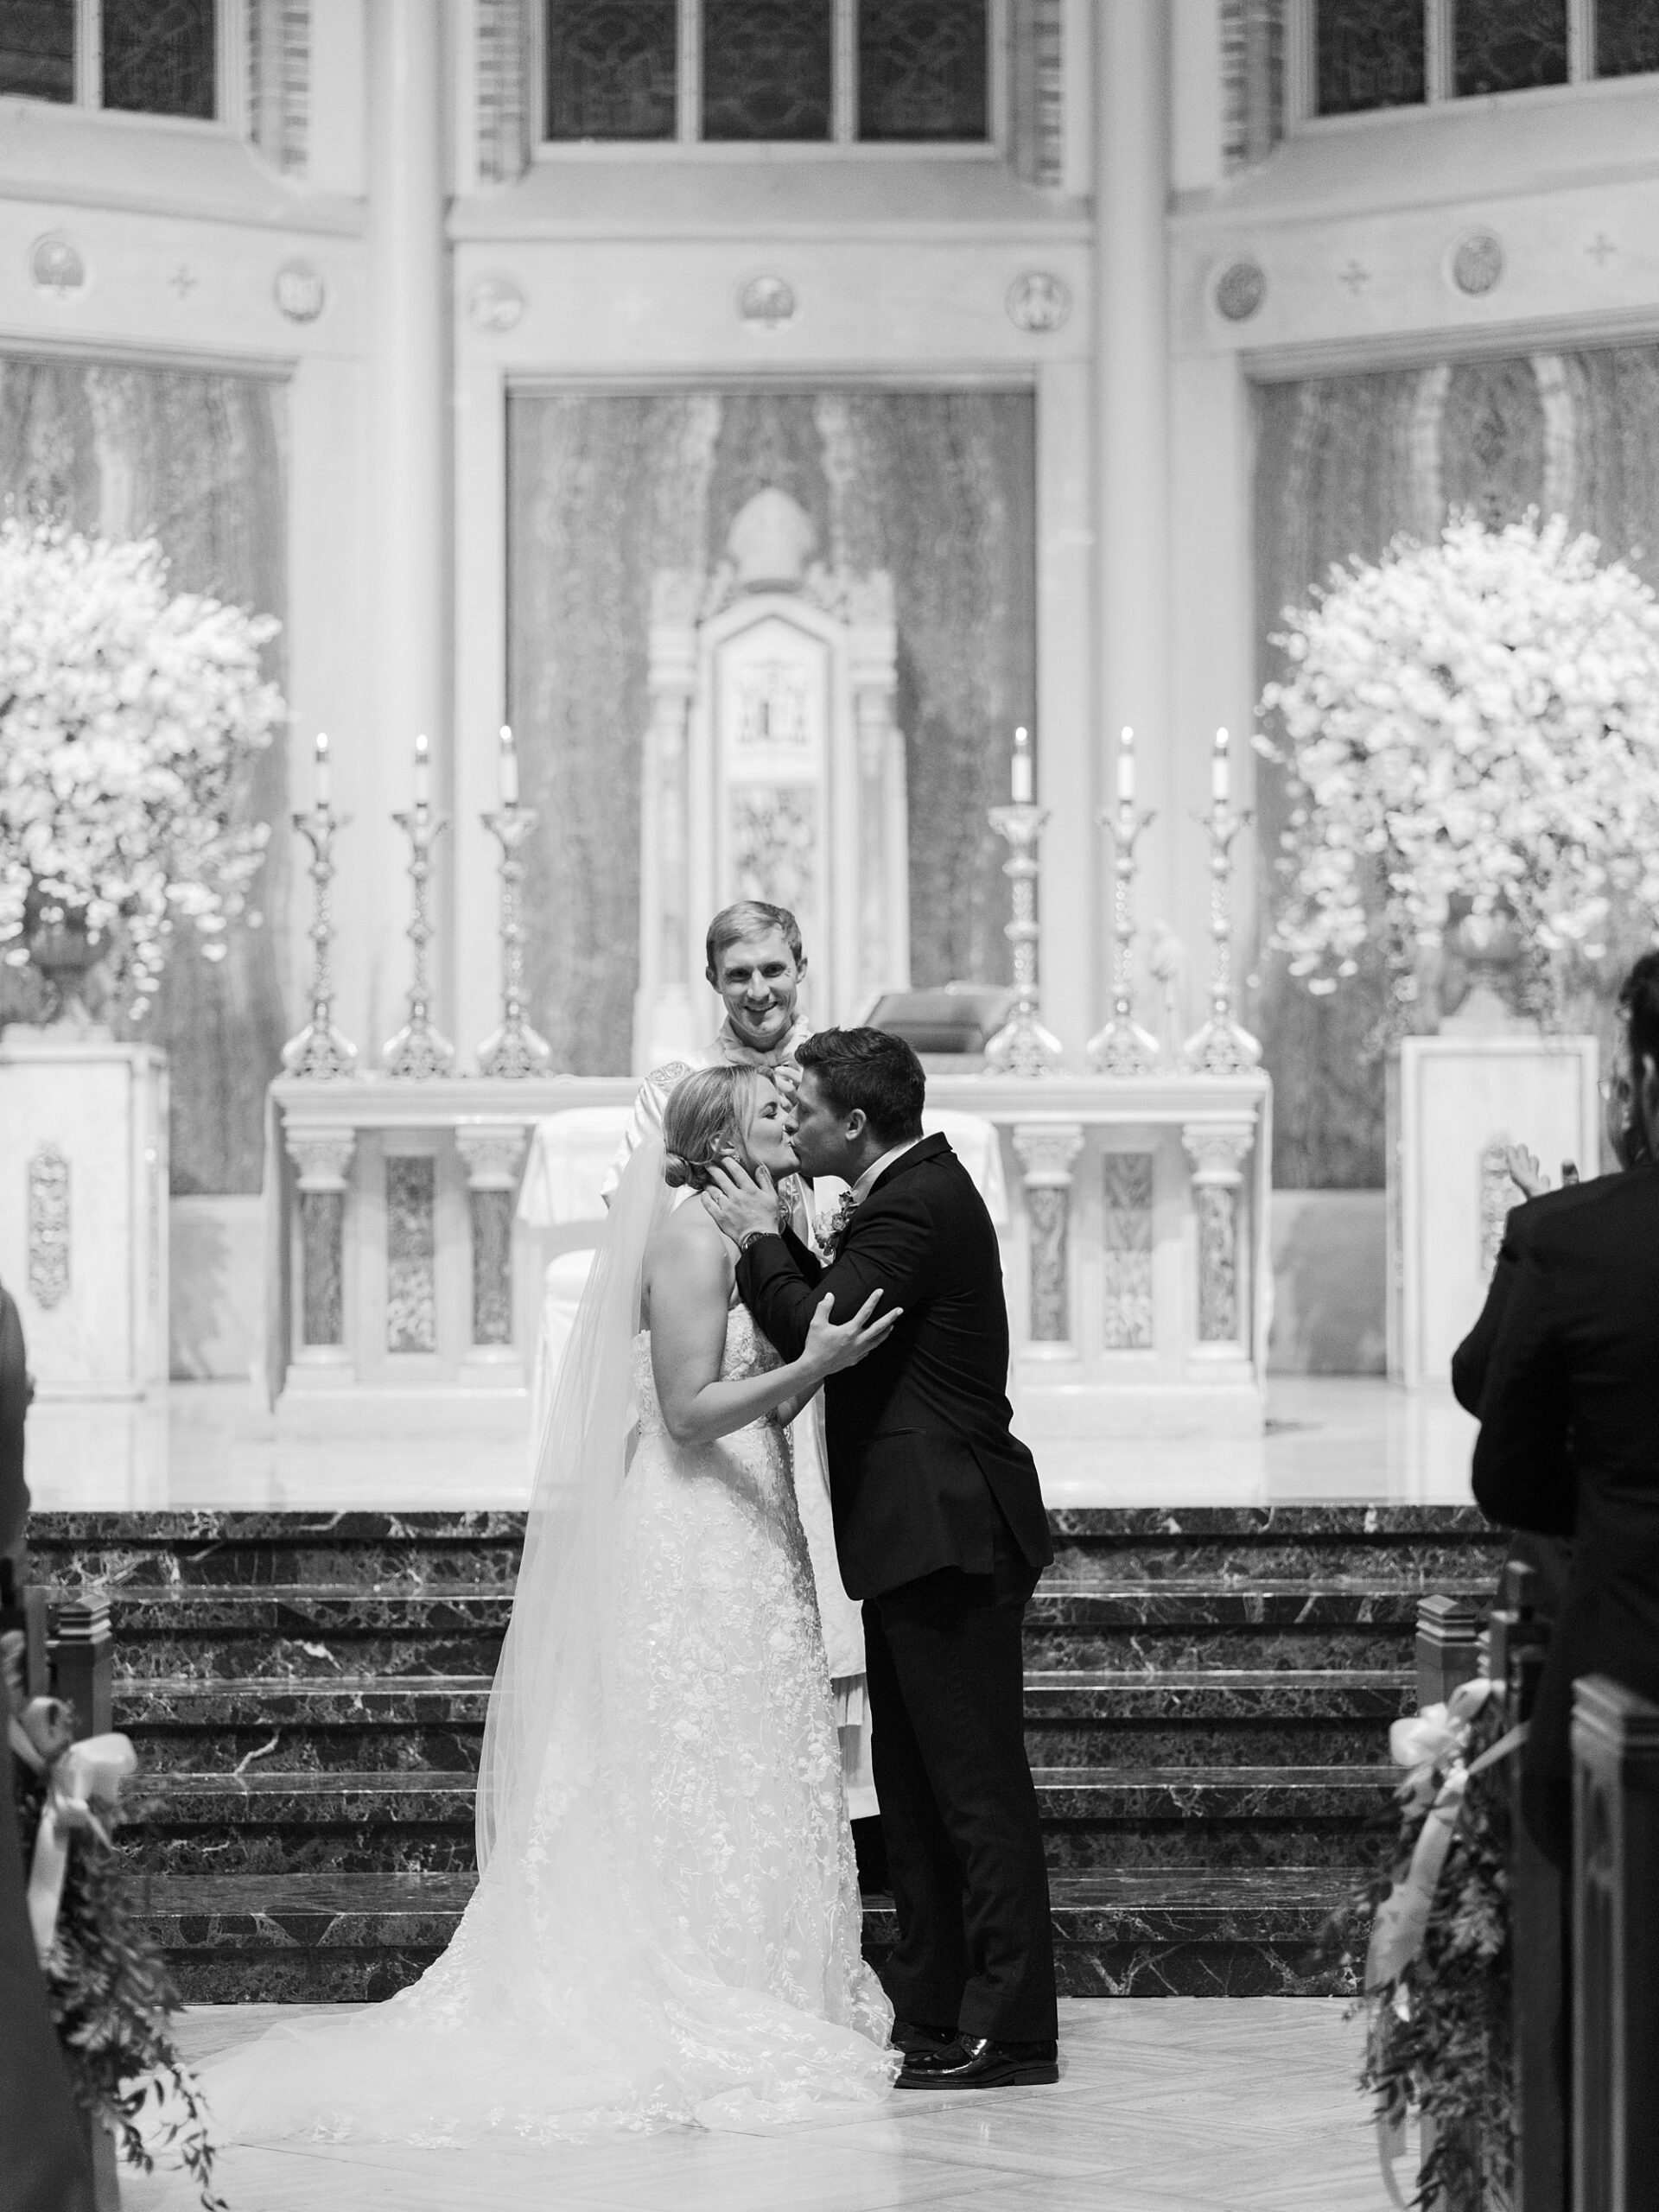 newlyweds kiss during wedding ceremony inside the Cathedral of St. John the Evangelist